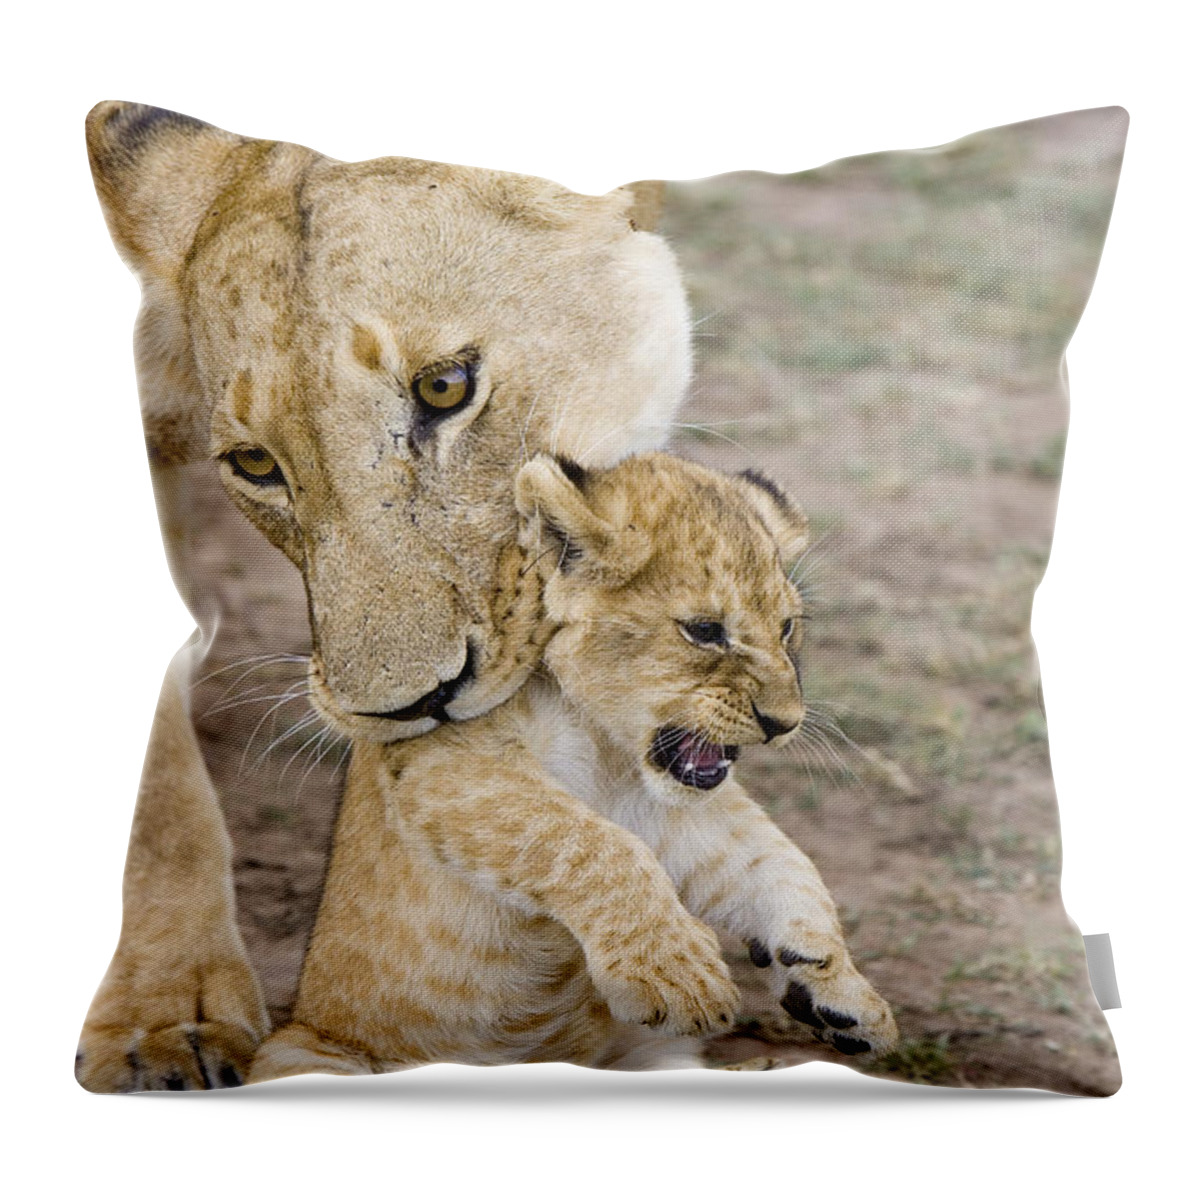 00761319 Throw Pillow featuring the photograph African Lion Mother Picking Up Cub by Suzi Eszterhas